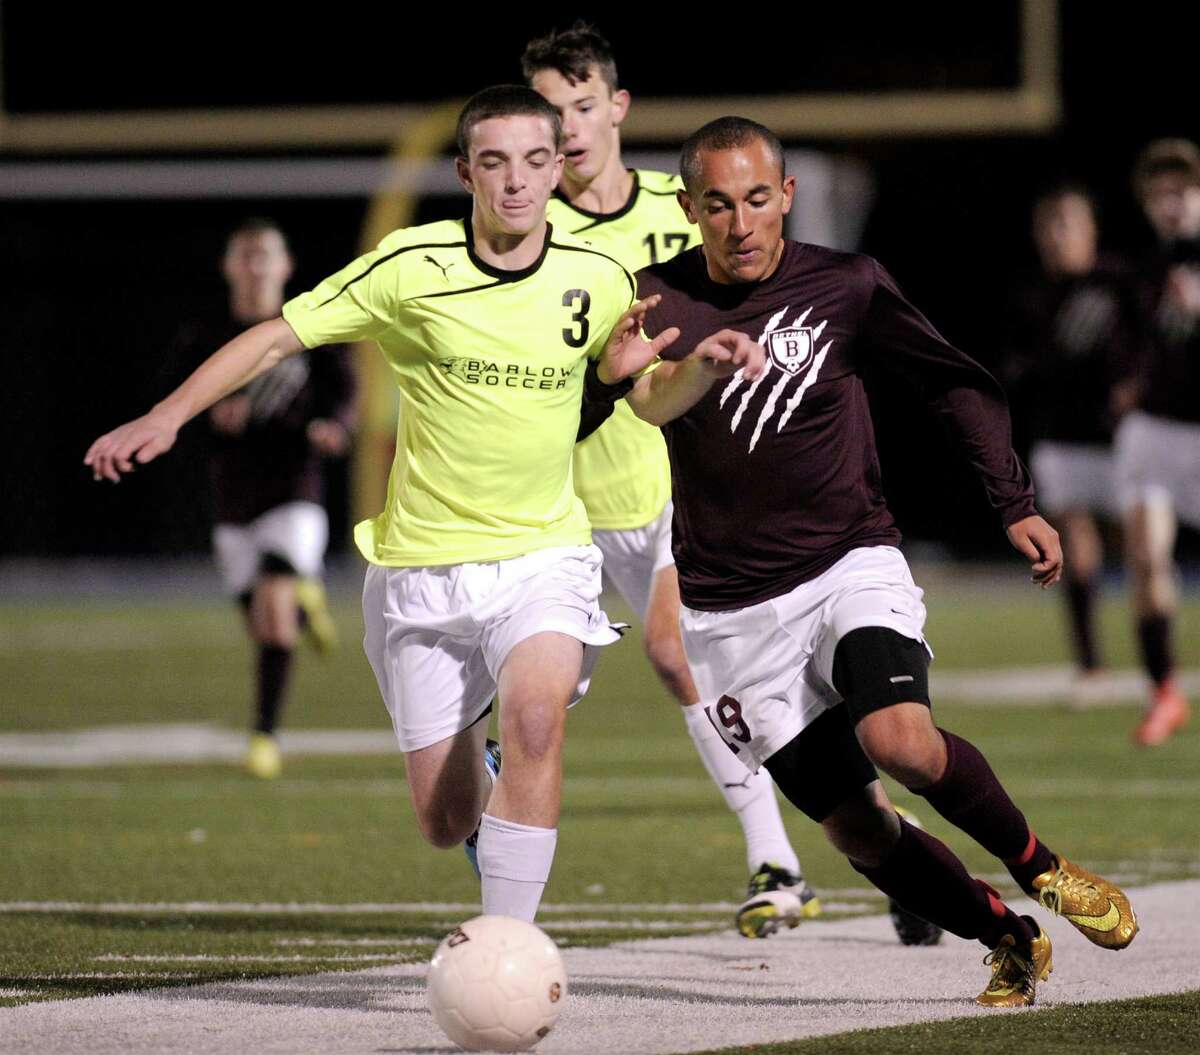 Barlow's Dan Dolan (3) and Bethel's Jimmy Oates battle for the ball during last year’s SWC boys soccer championship game at Newtown High School. Barlow won 1-0 to earn its fifth title in 10 years.